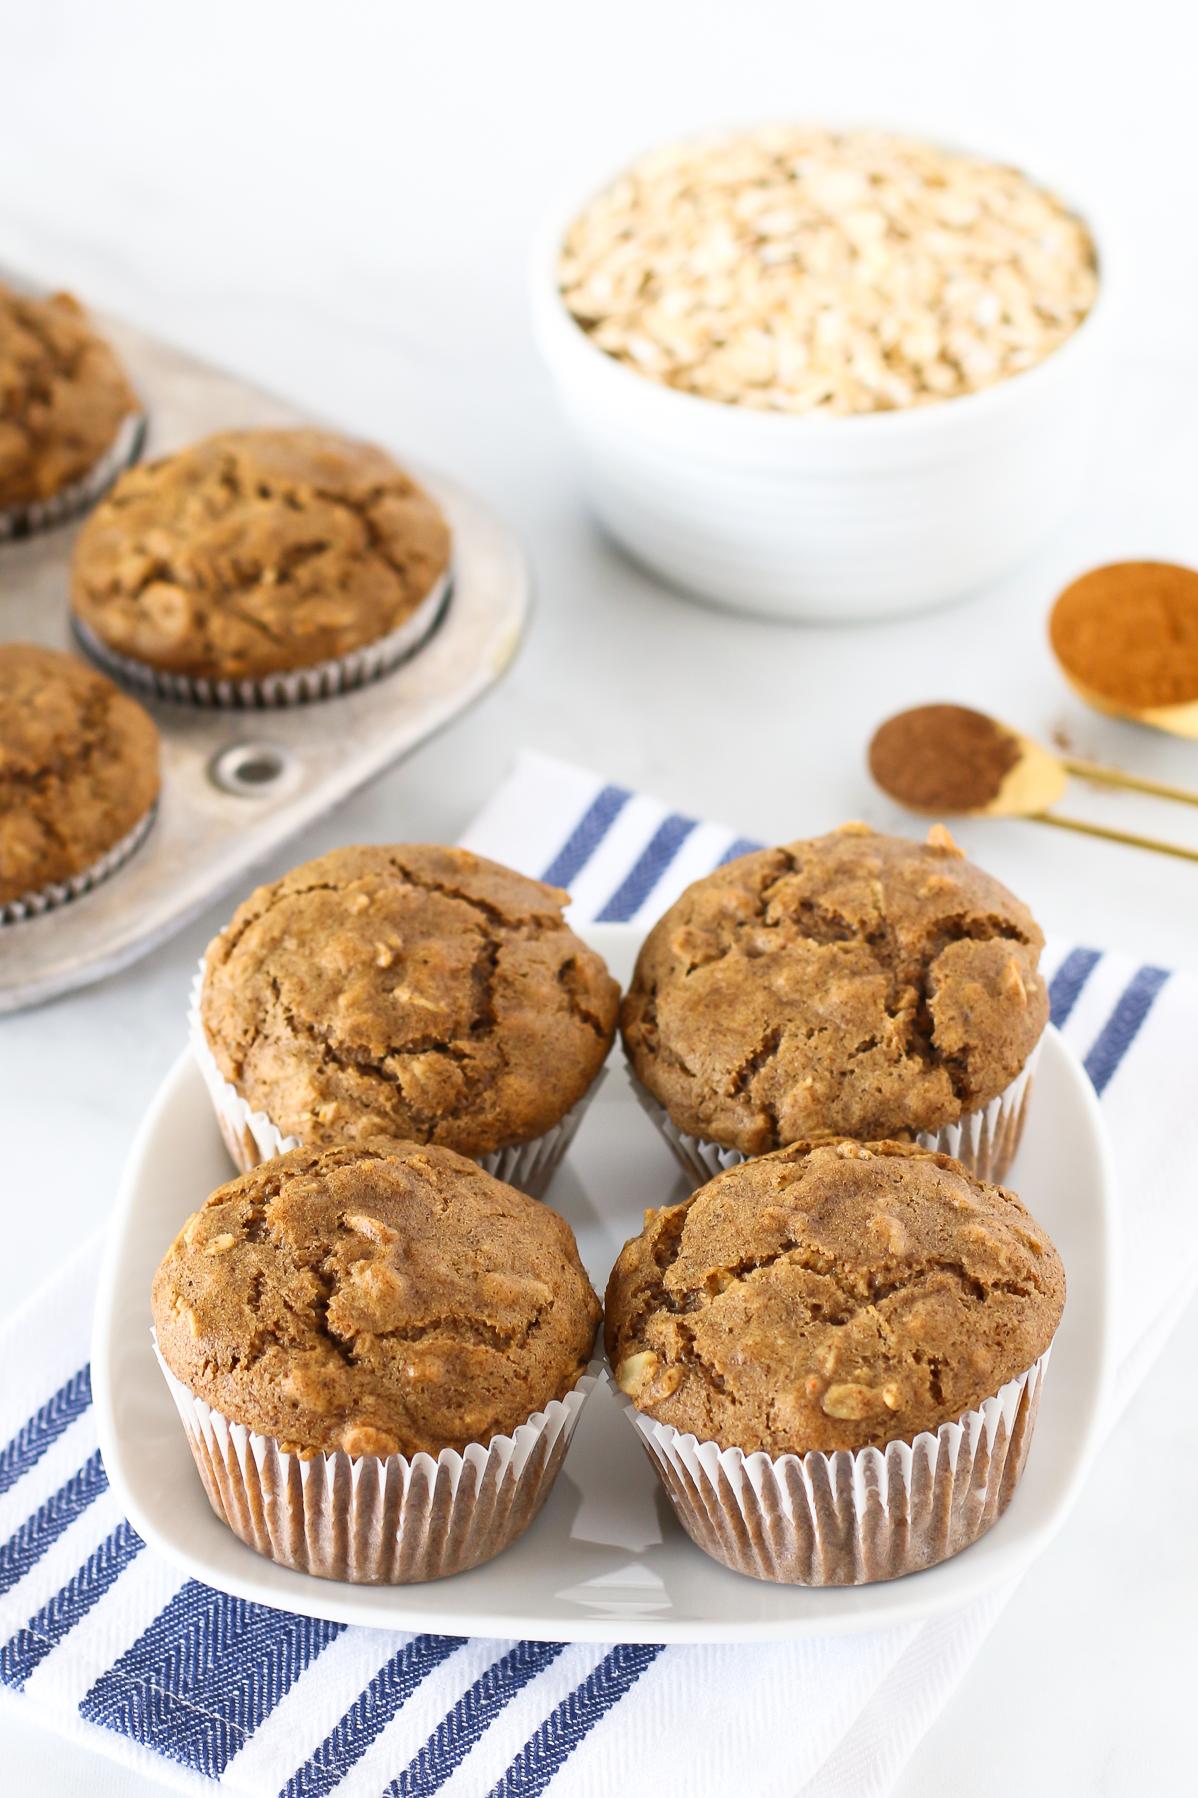  These muffins are loaded with fiber, protein and healthy fats.